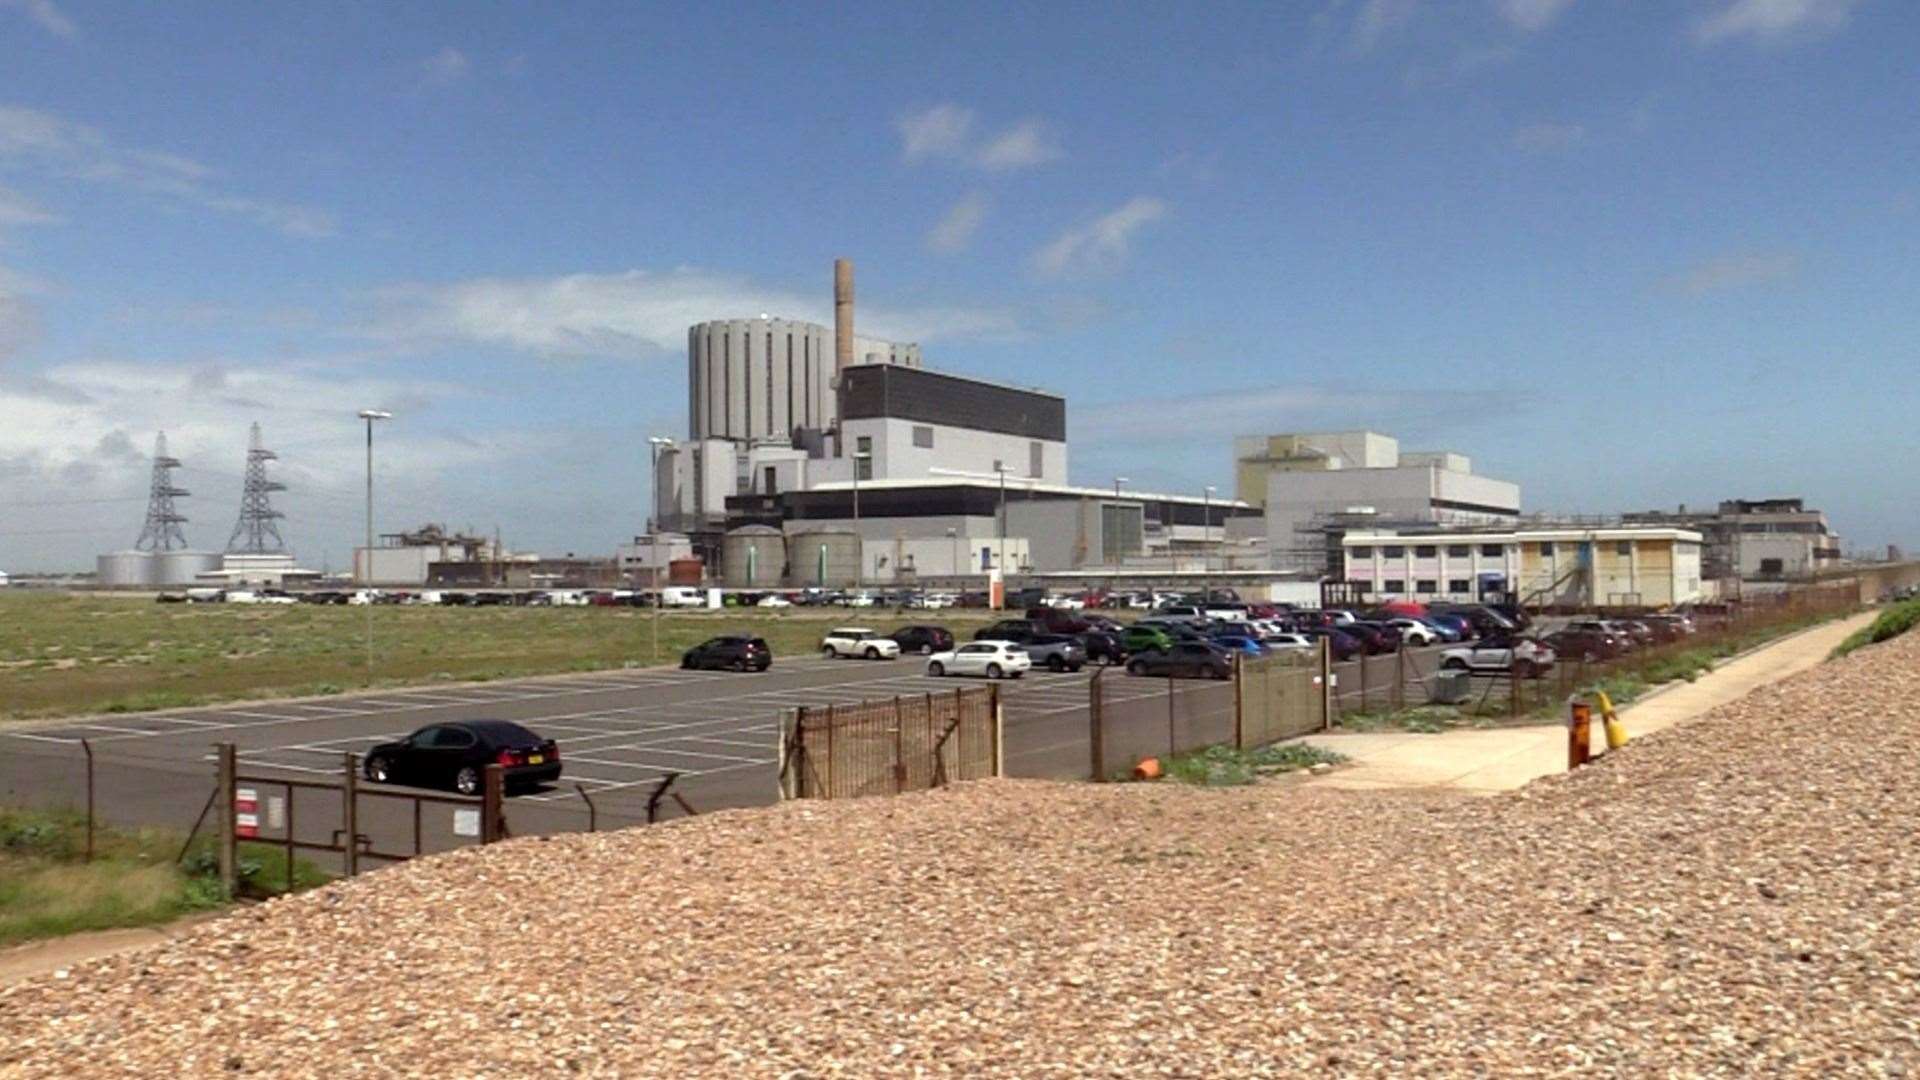 An employee was electrocuted during maintenance work at Dungeness B power station in Romney Marsh